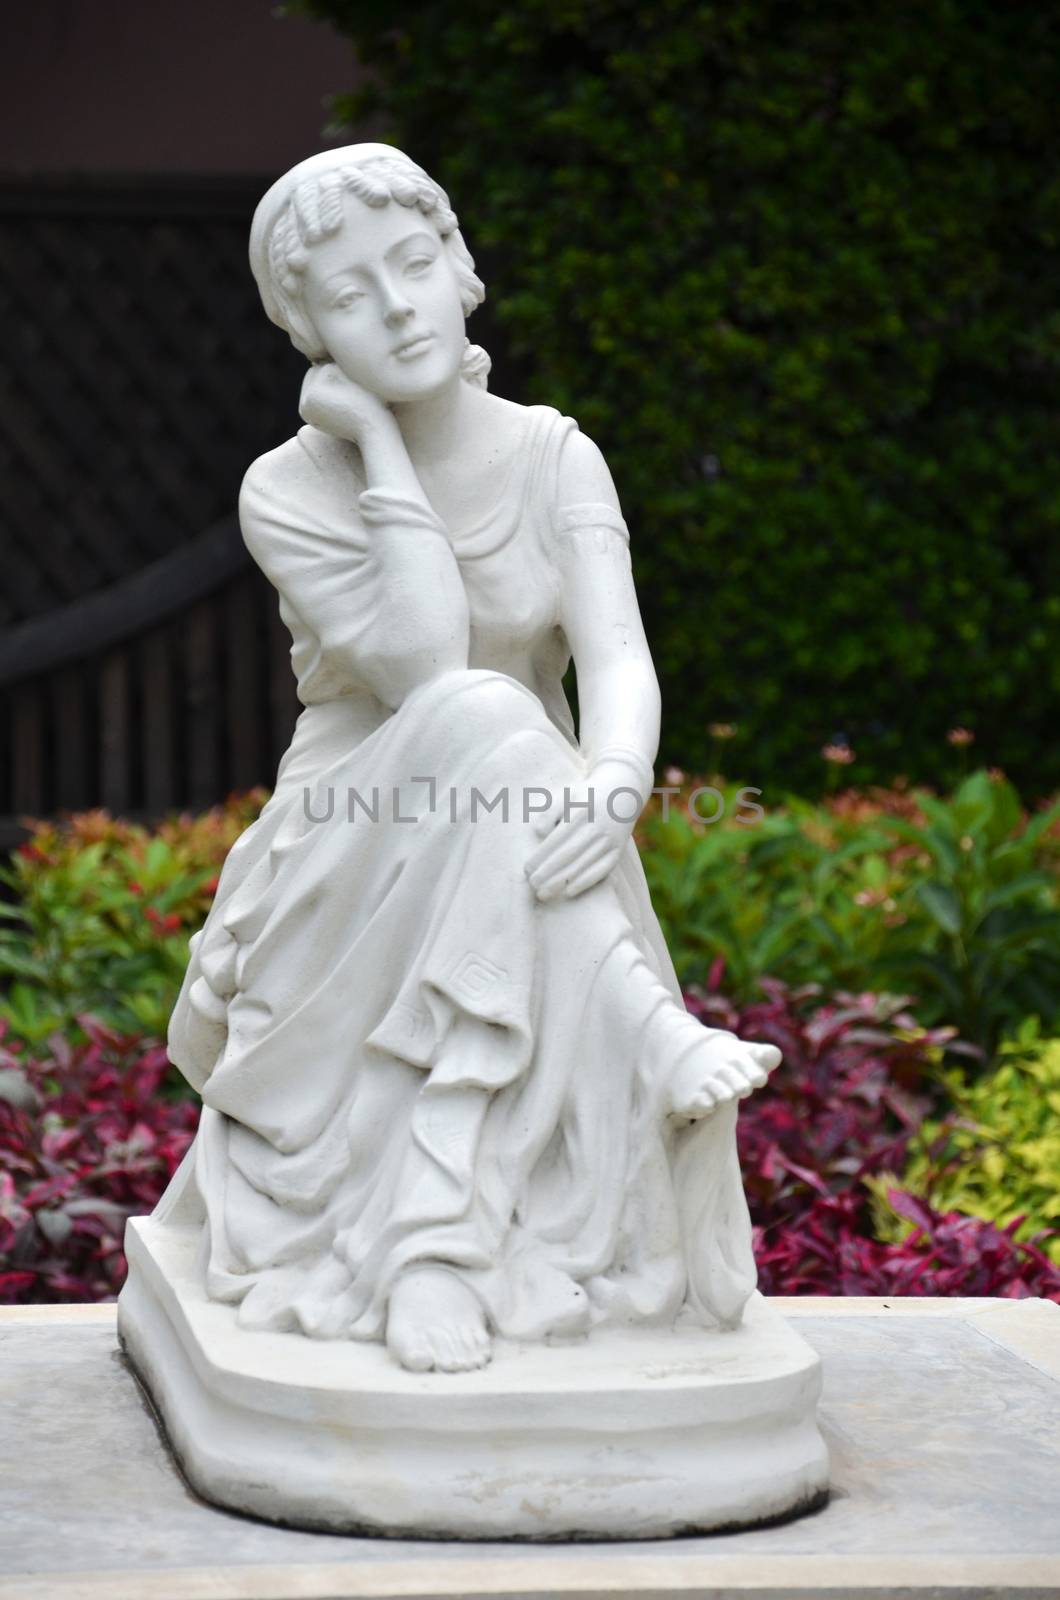 Angel sculpture in the park by tang90246